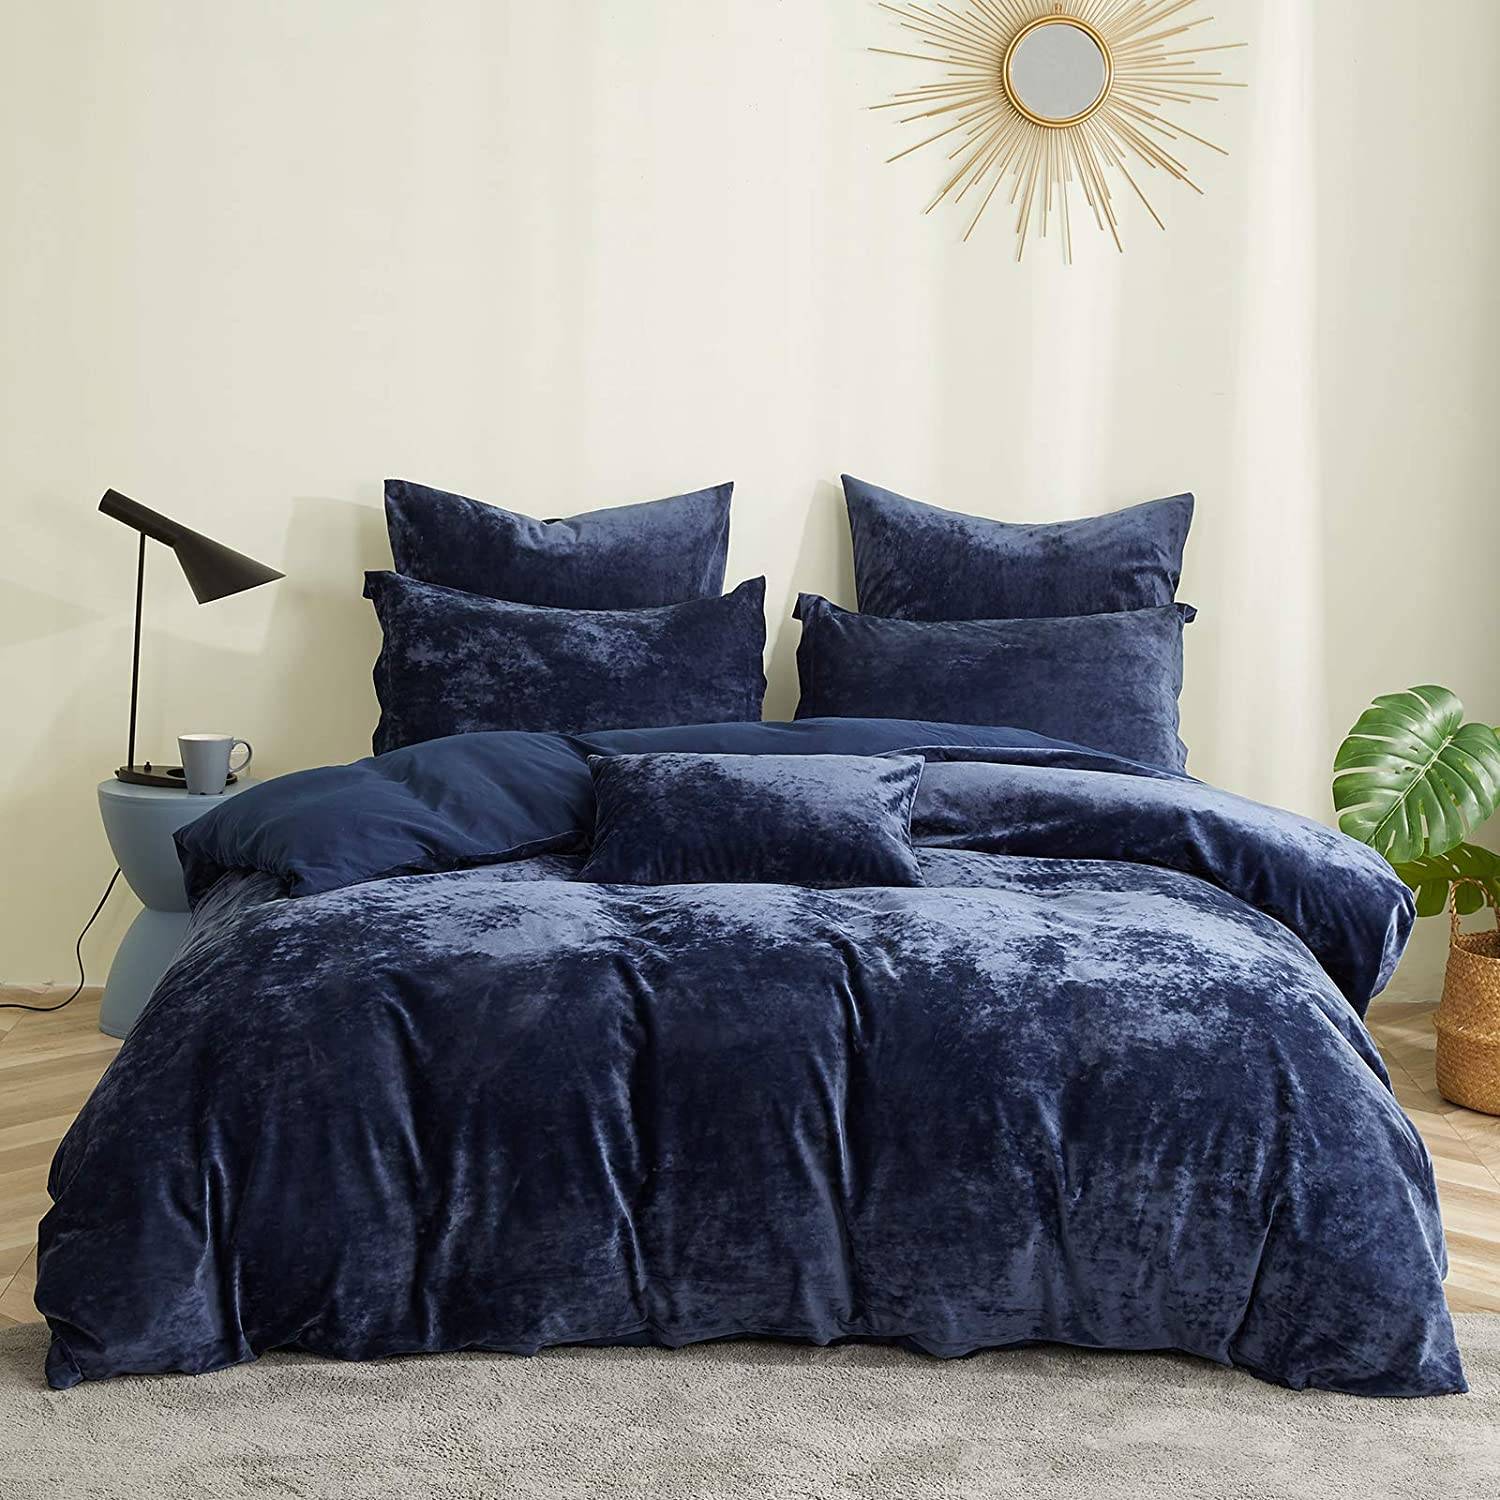 Heavyweight Velvet Duvet Cover Set give a comfortable feeling in bedding Featured Image